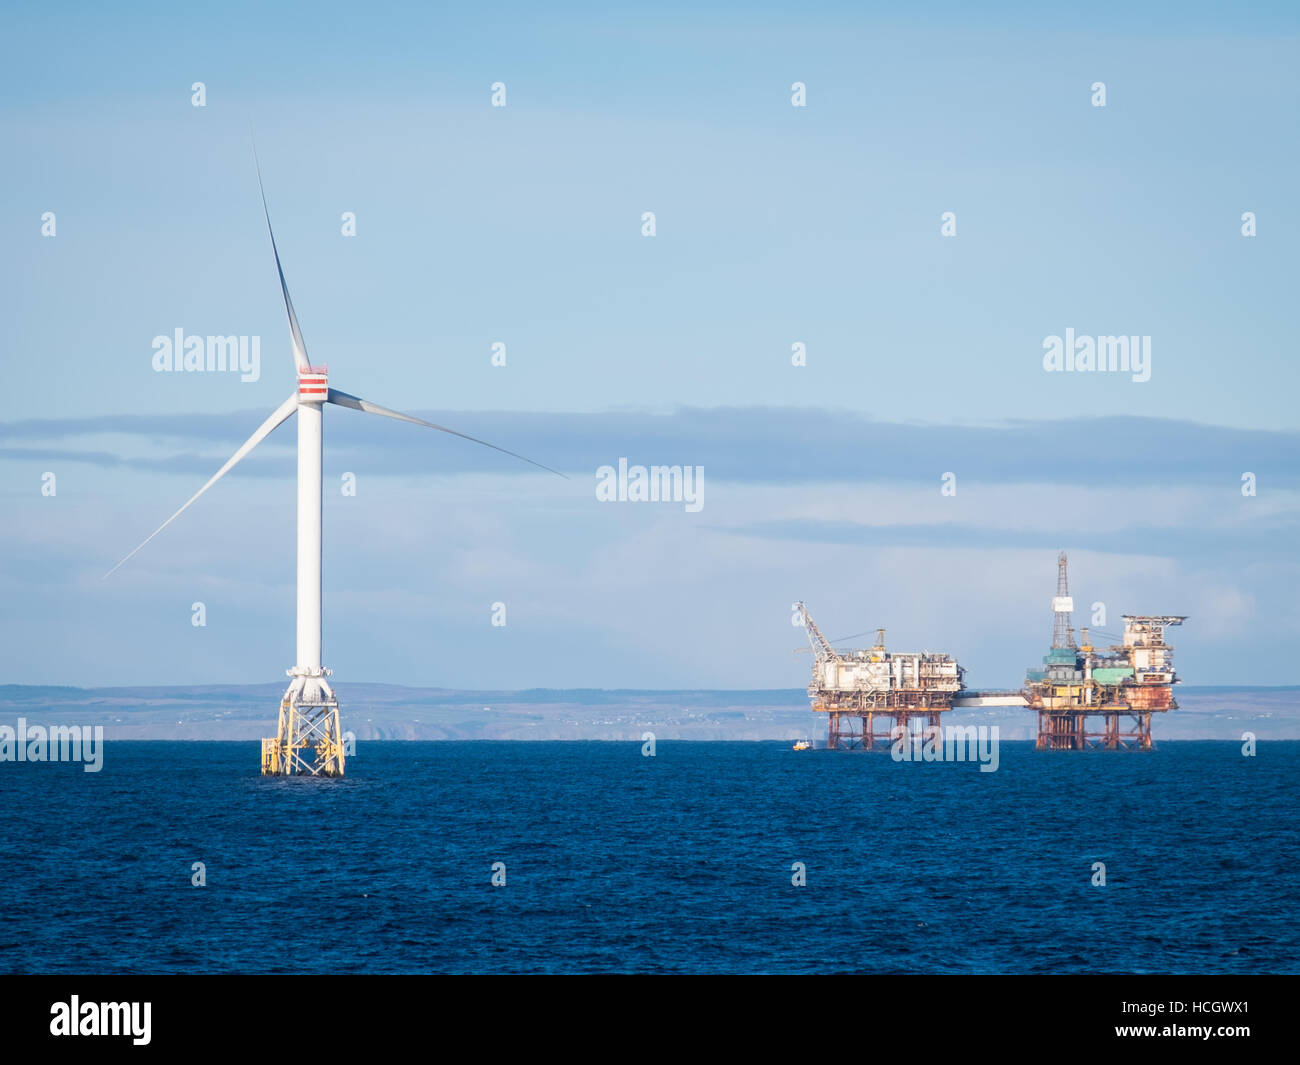 Wind Turbine Generators of the Beatrice Demonstration Project and Beatrice A oil platform in the Moray Firth, Scotland Stock Photo